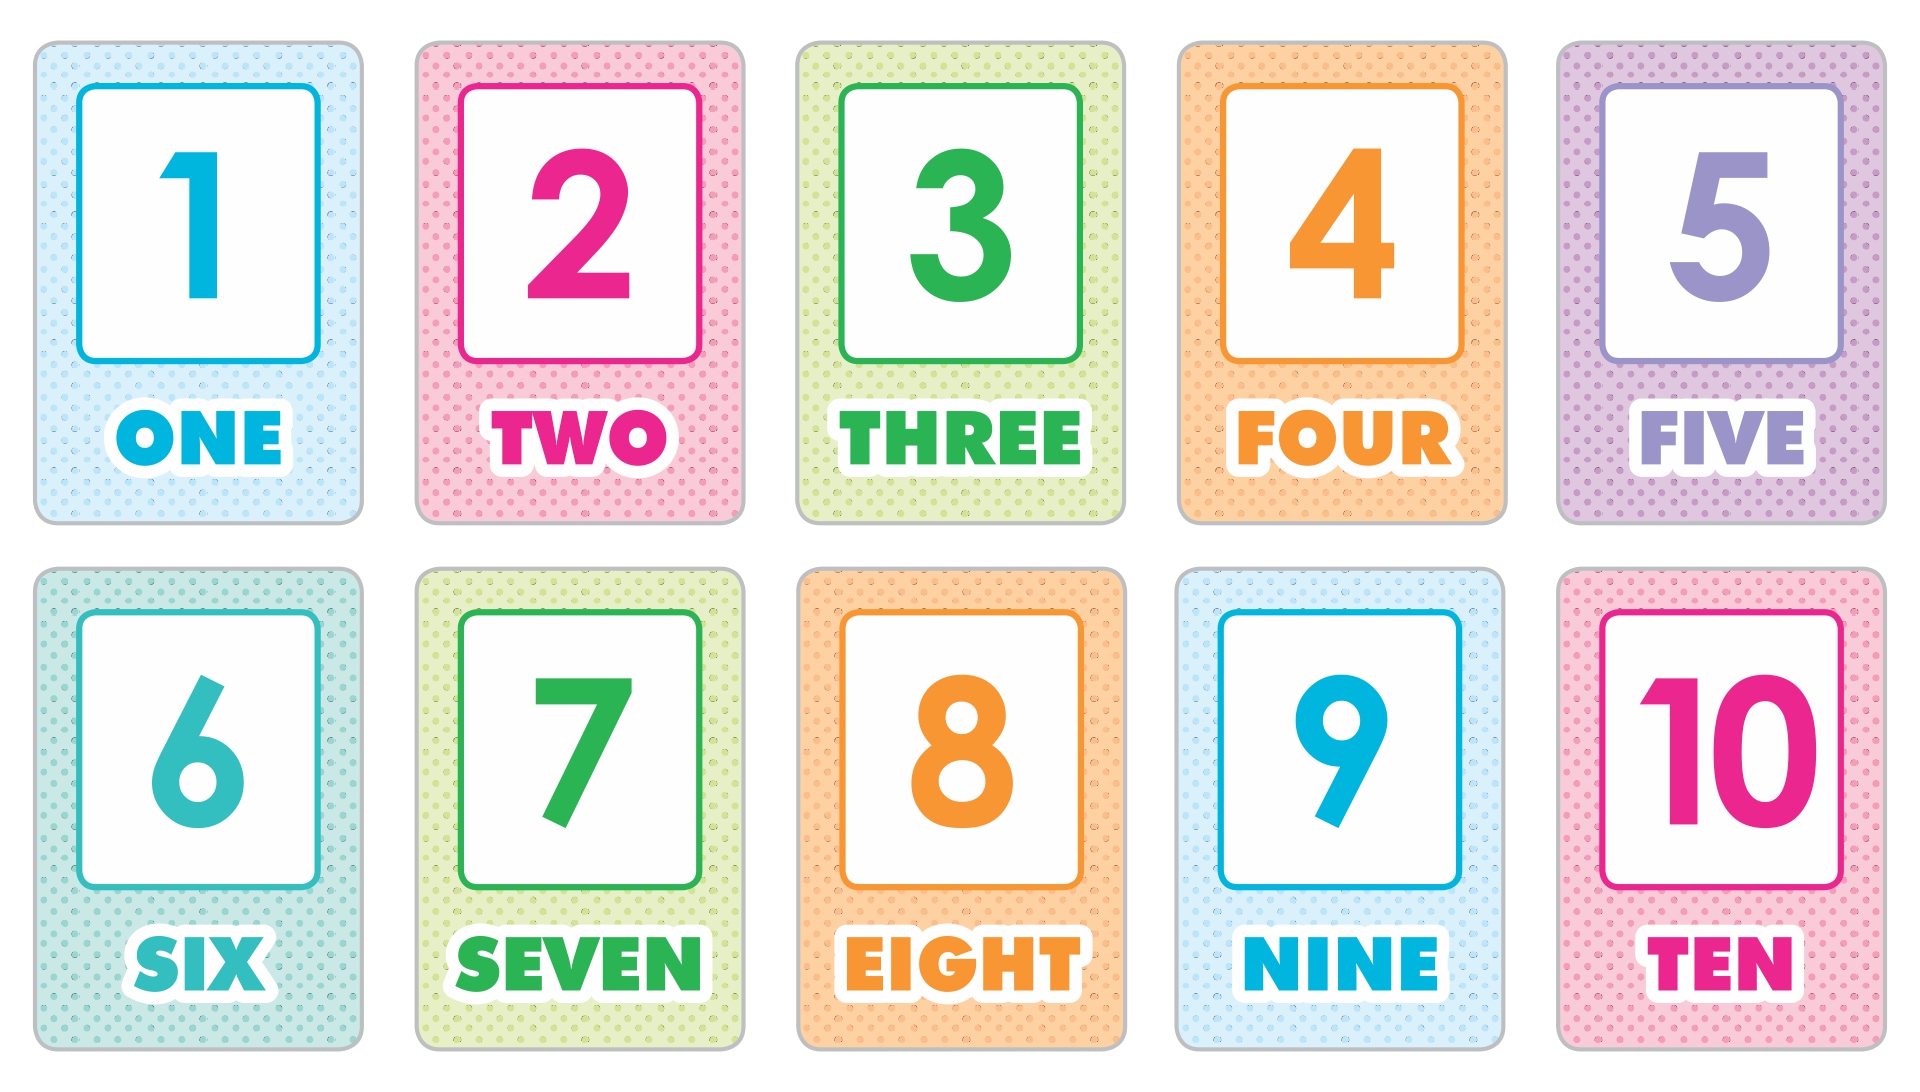 flash-cards-free-large-printable-numbers-1-100-each-card-has-its-gambaran